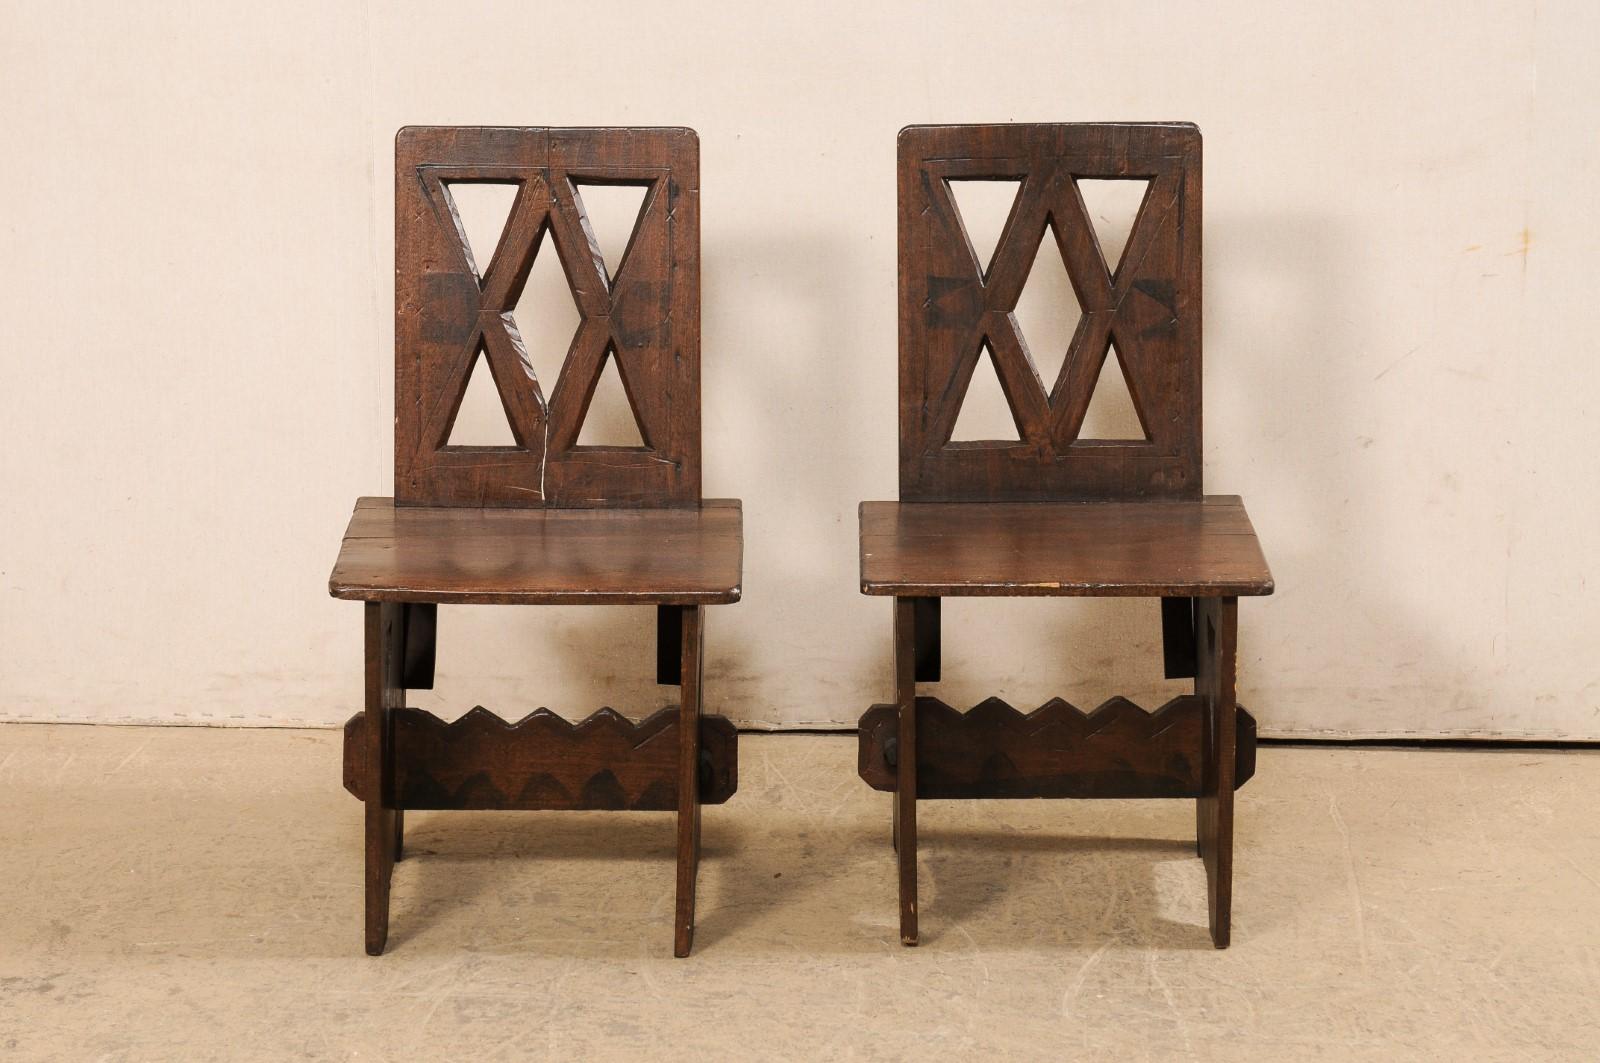 Interesting Pair of Carved Fire-Side Chairs W/Geometric Cut-Outs, N. Africa 5